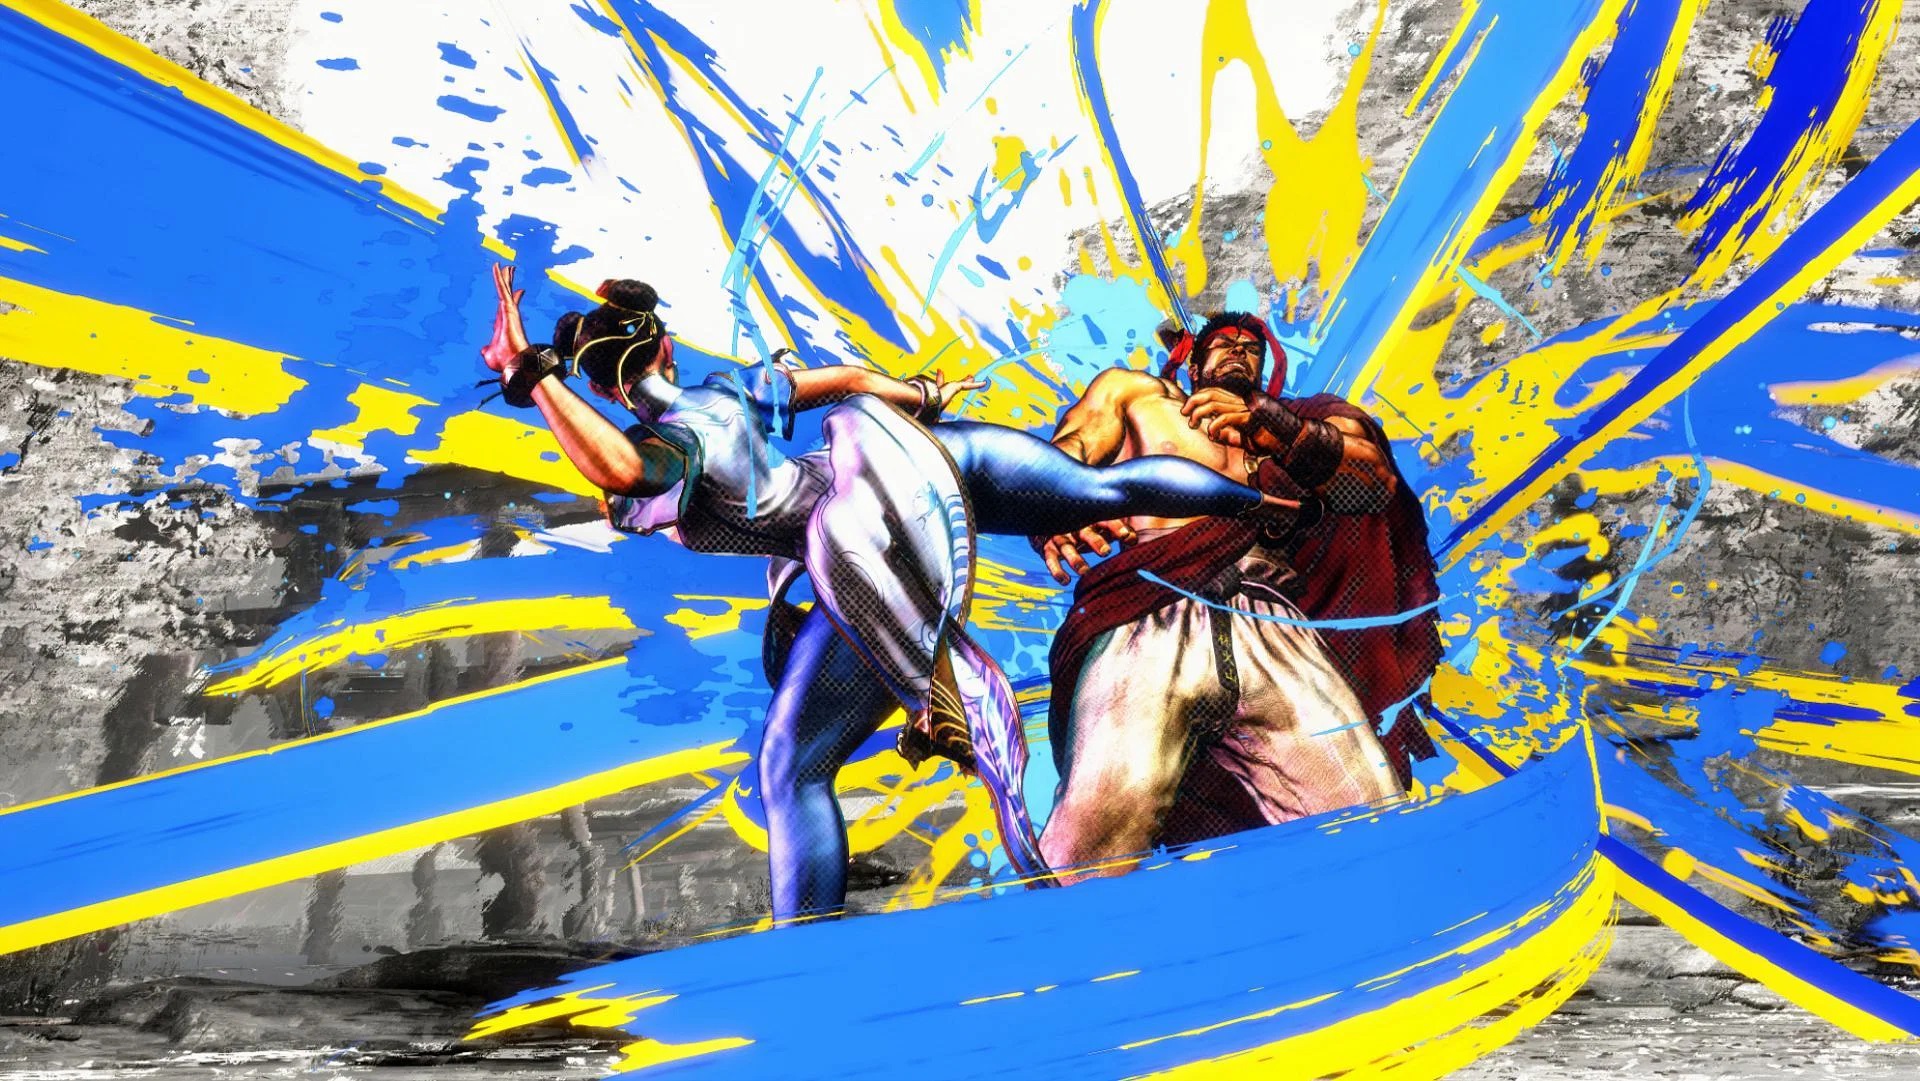 Review: Street Fighter 6 Is Fun, But Why Can't I Build a